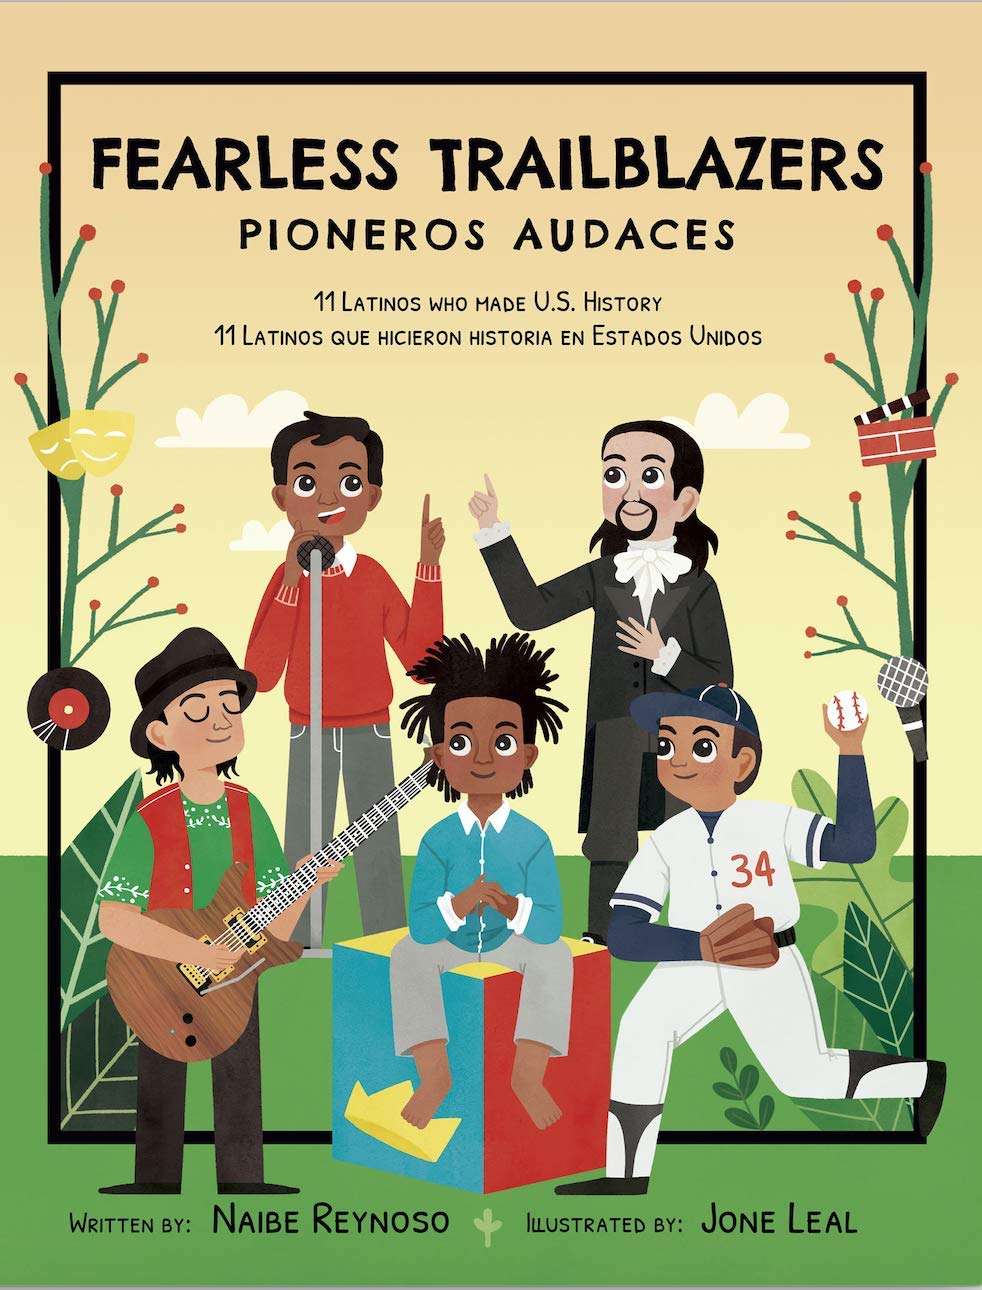 Fearless Trailblazers: 11 Latinos who made U.S. History (English and Spanish Edition) (Little Biographies for Bright Minds)